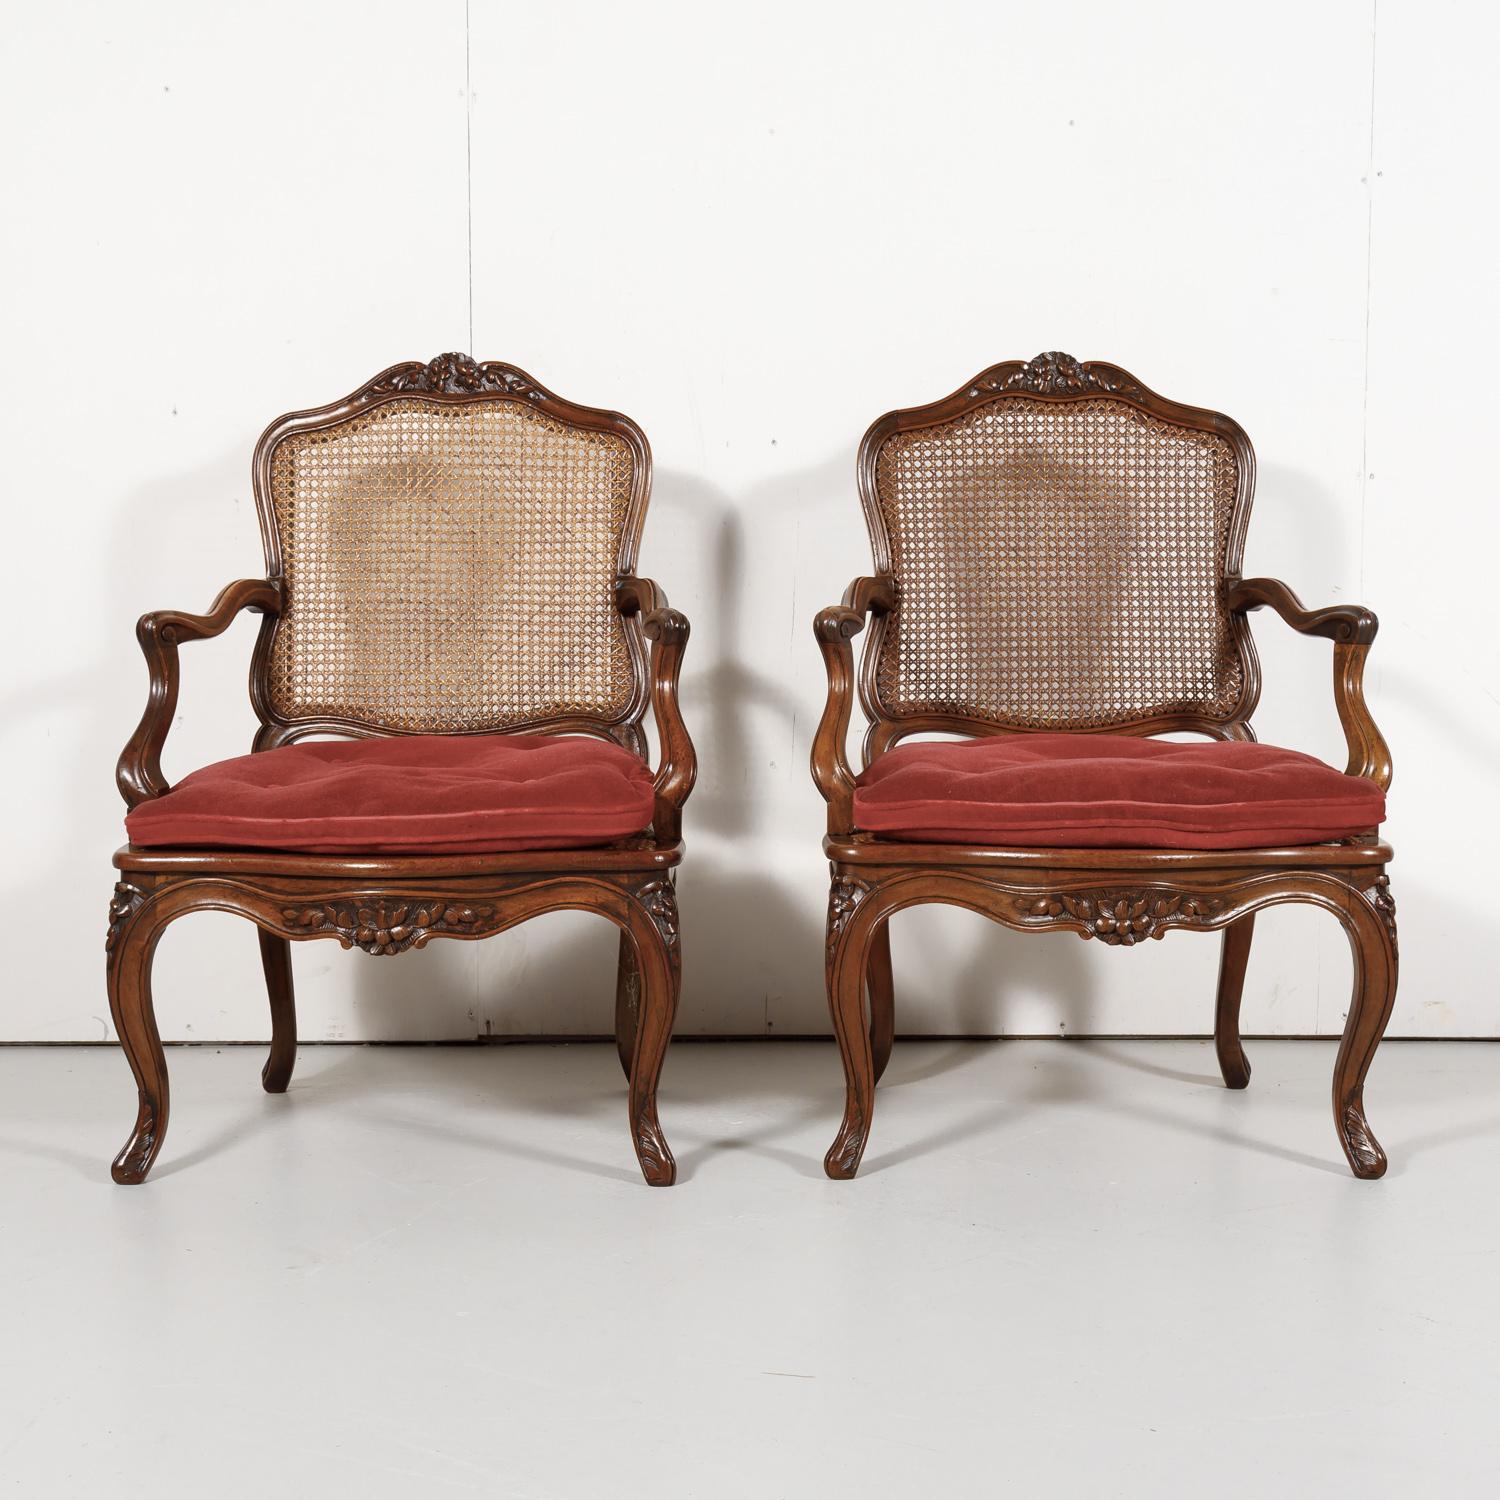 A lovely pair of 19th century Country French Louis XV style armchairs having solid walnut frames and cane seats and backs with removable loose cushions, and raised on elegant cabriole legs, circa 1890s. Each charming provincial armchair features